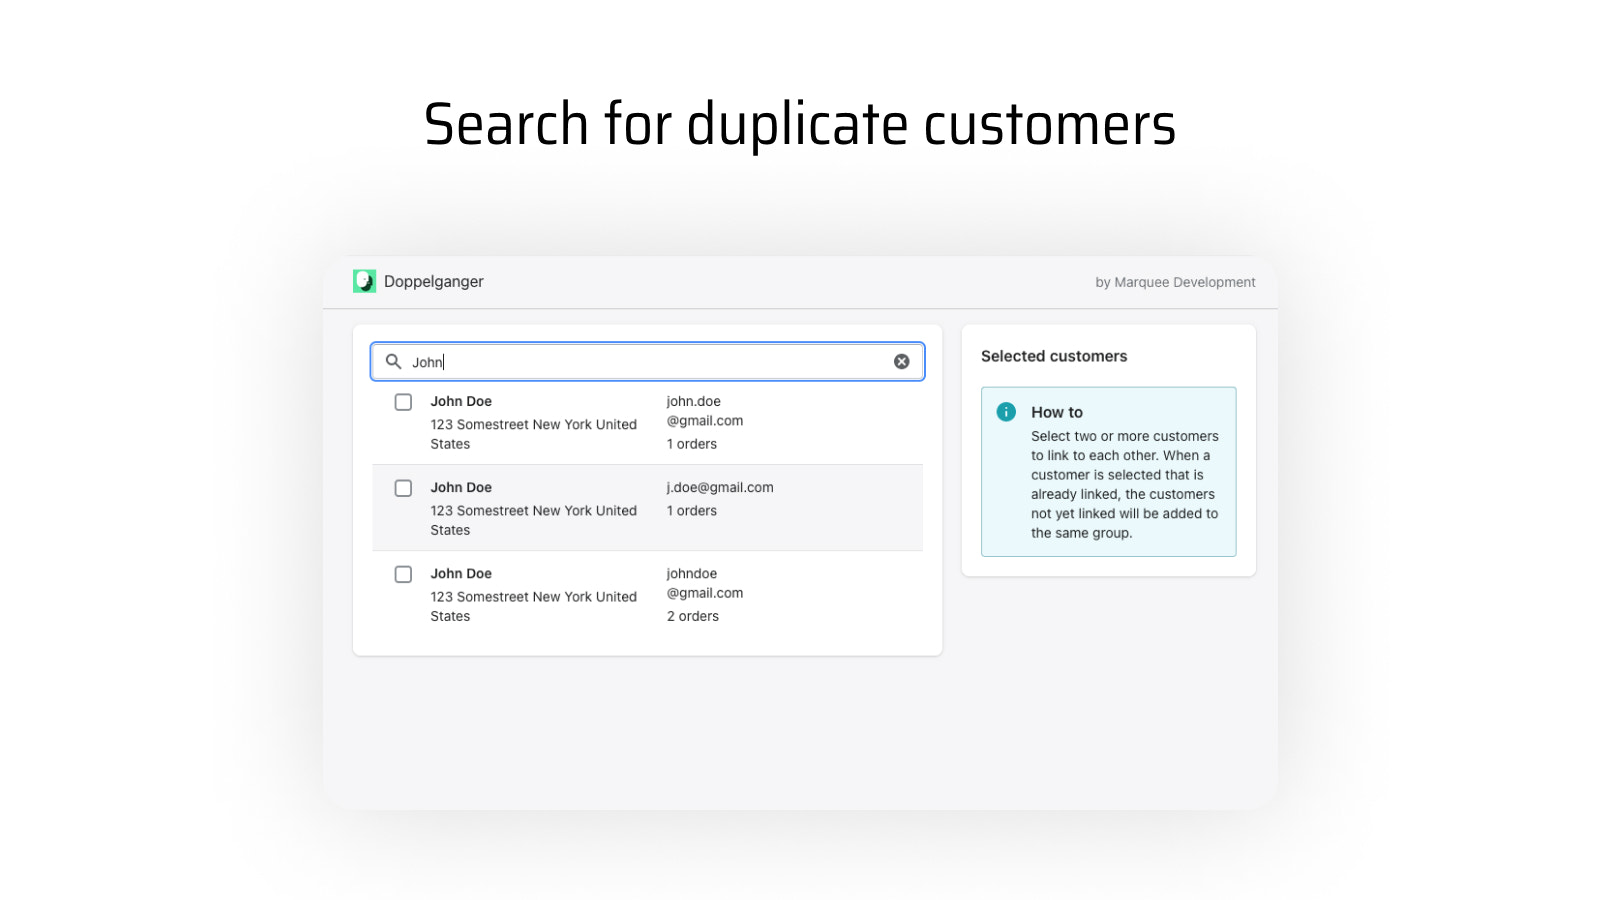 List of customers filtered by a search query in a search bar